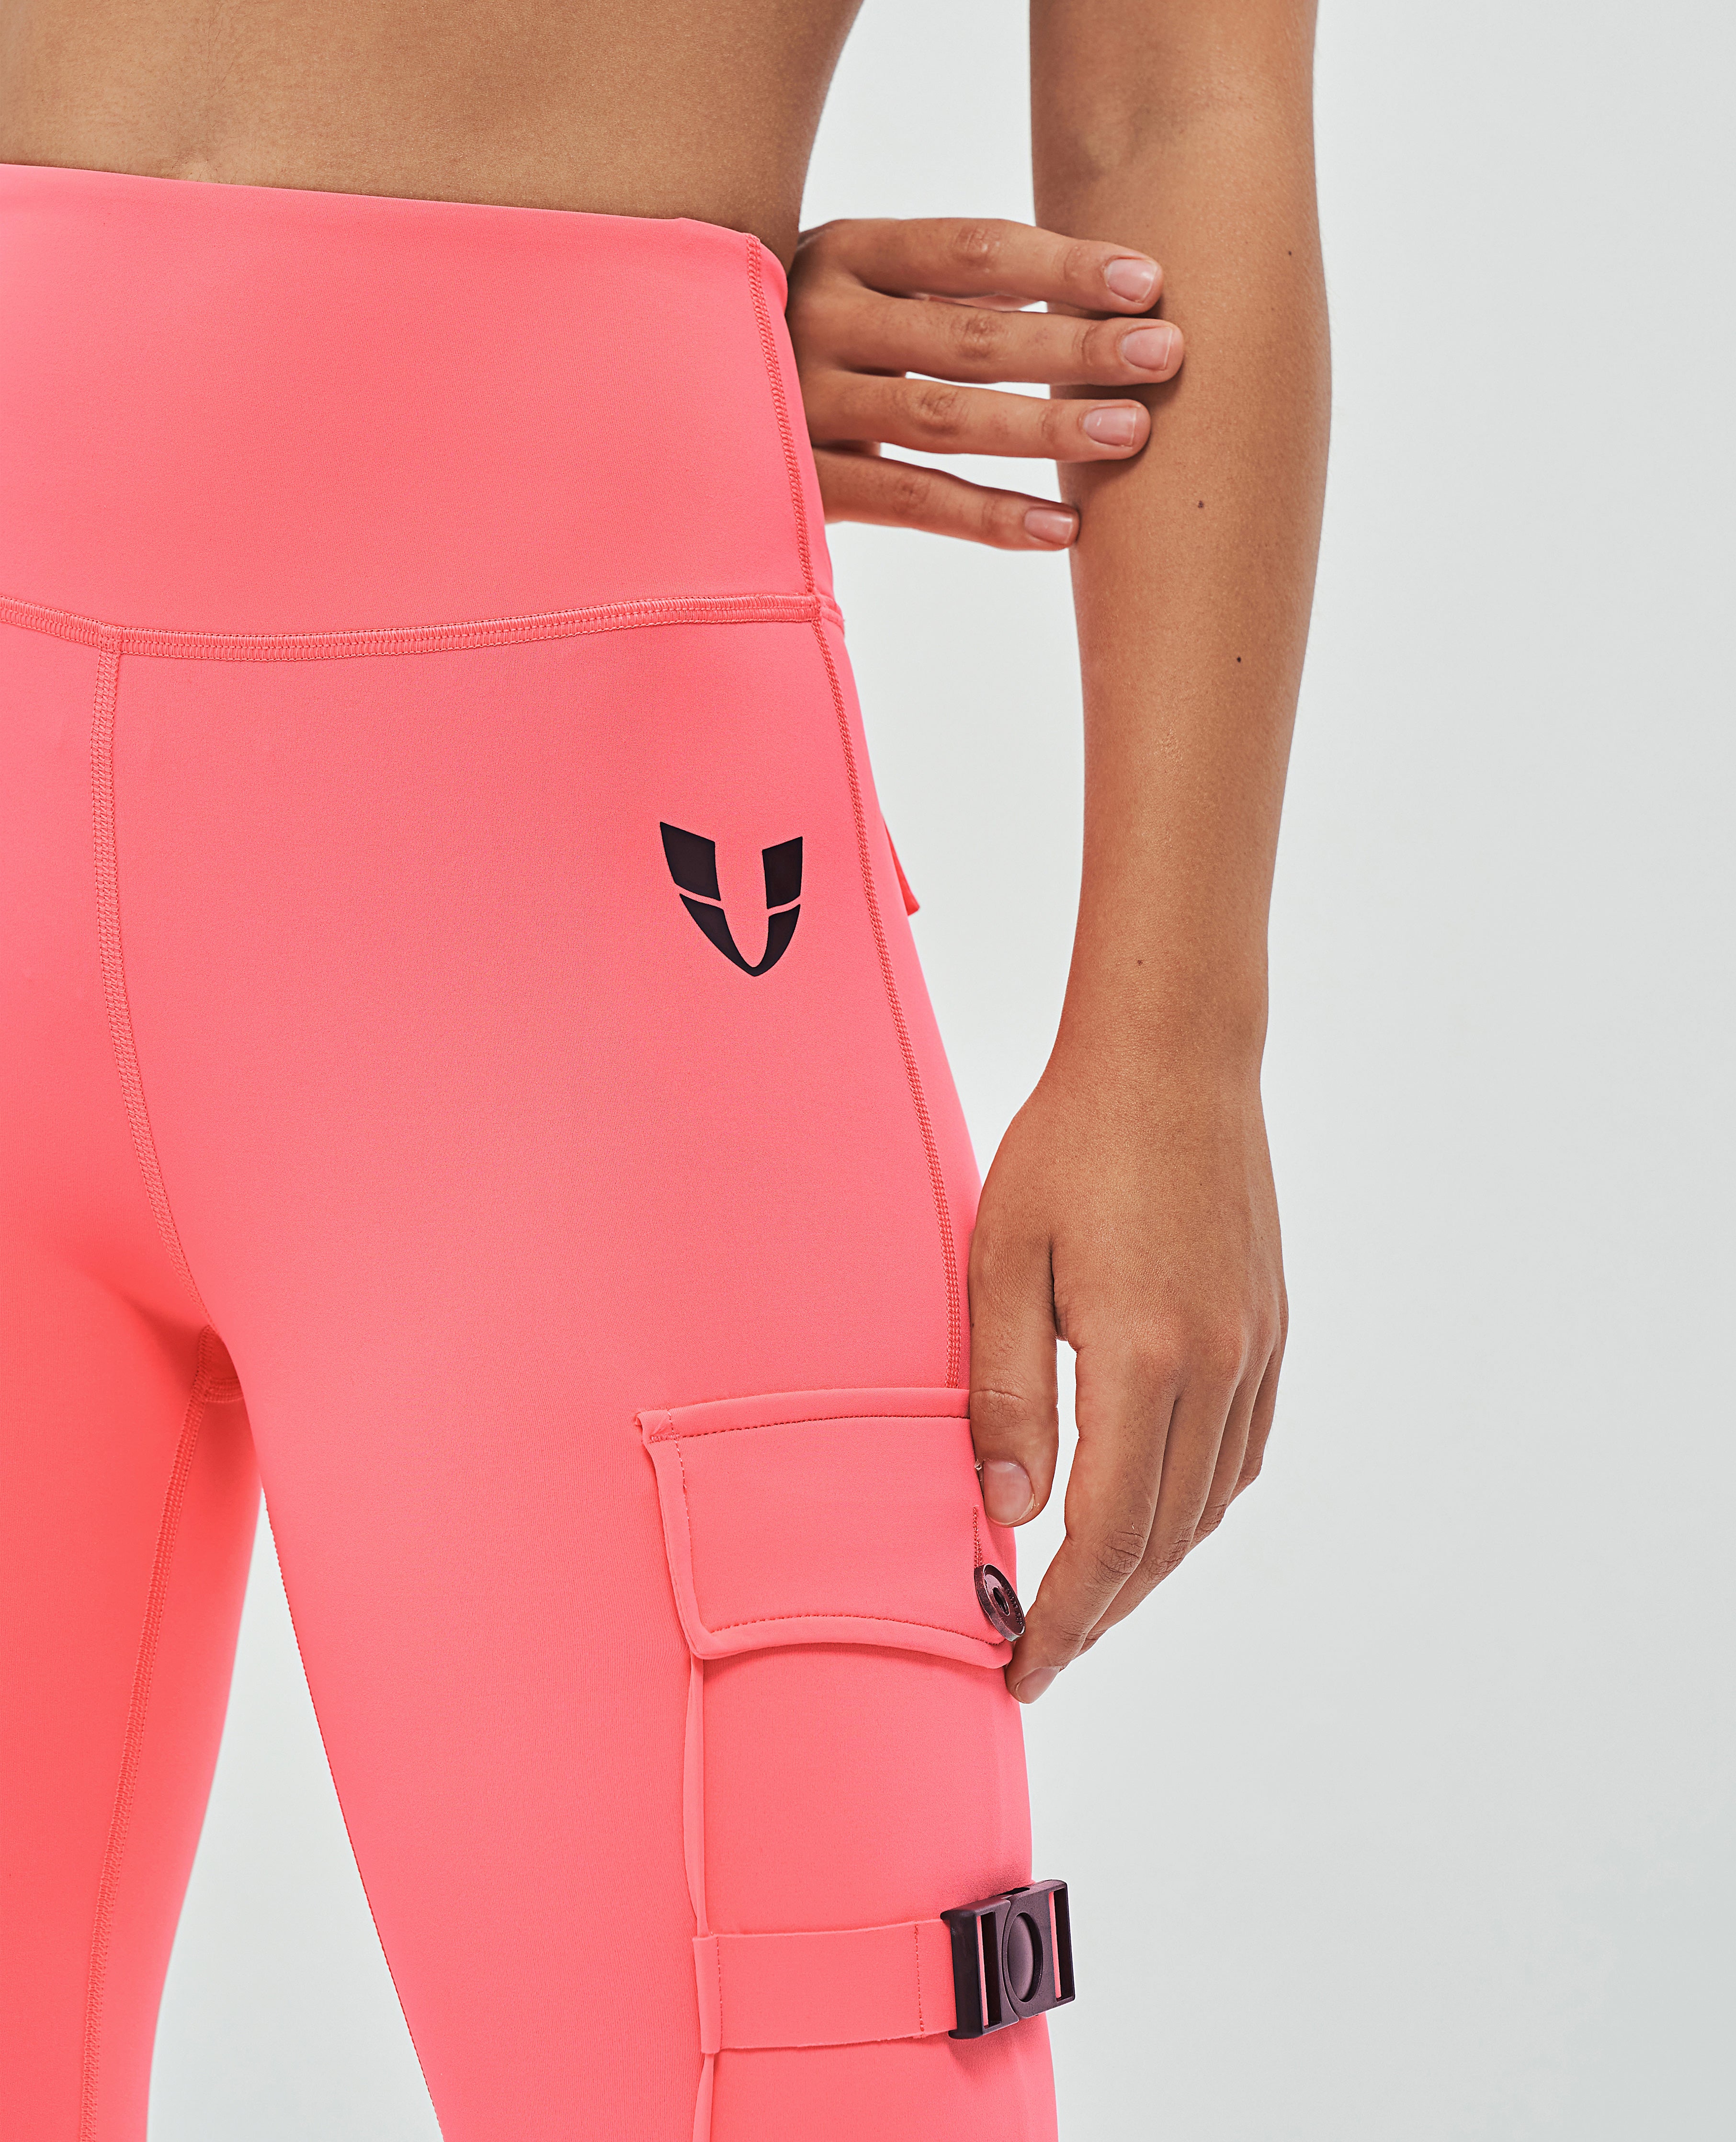 Cargo Fitness Leggings - Coral Red